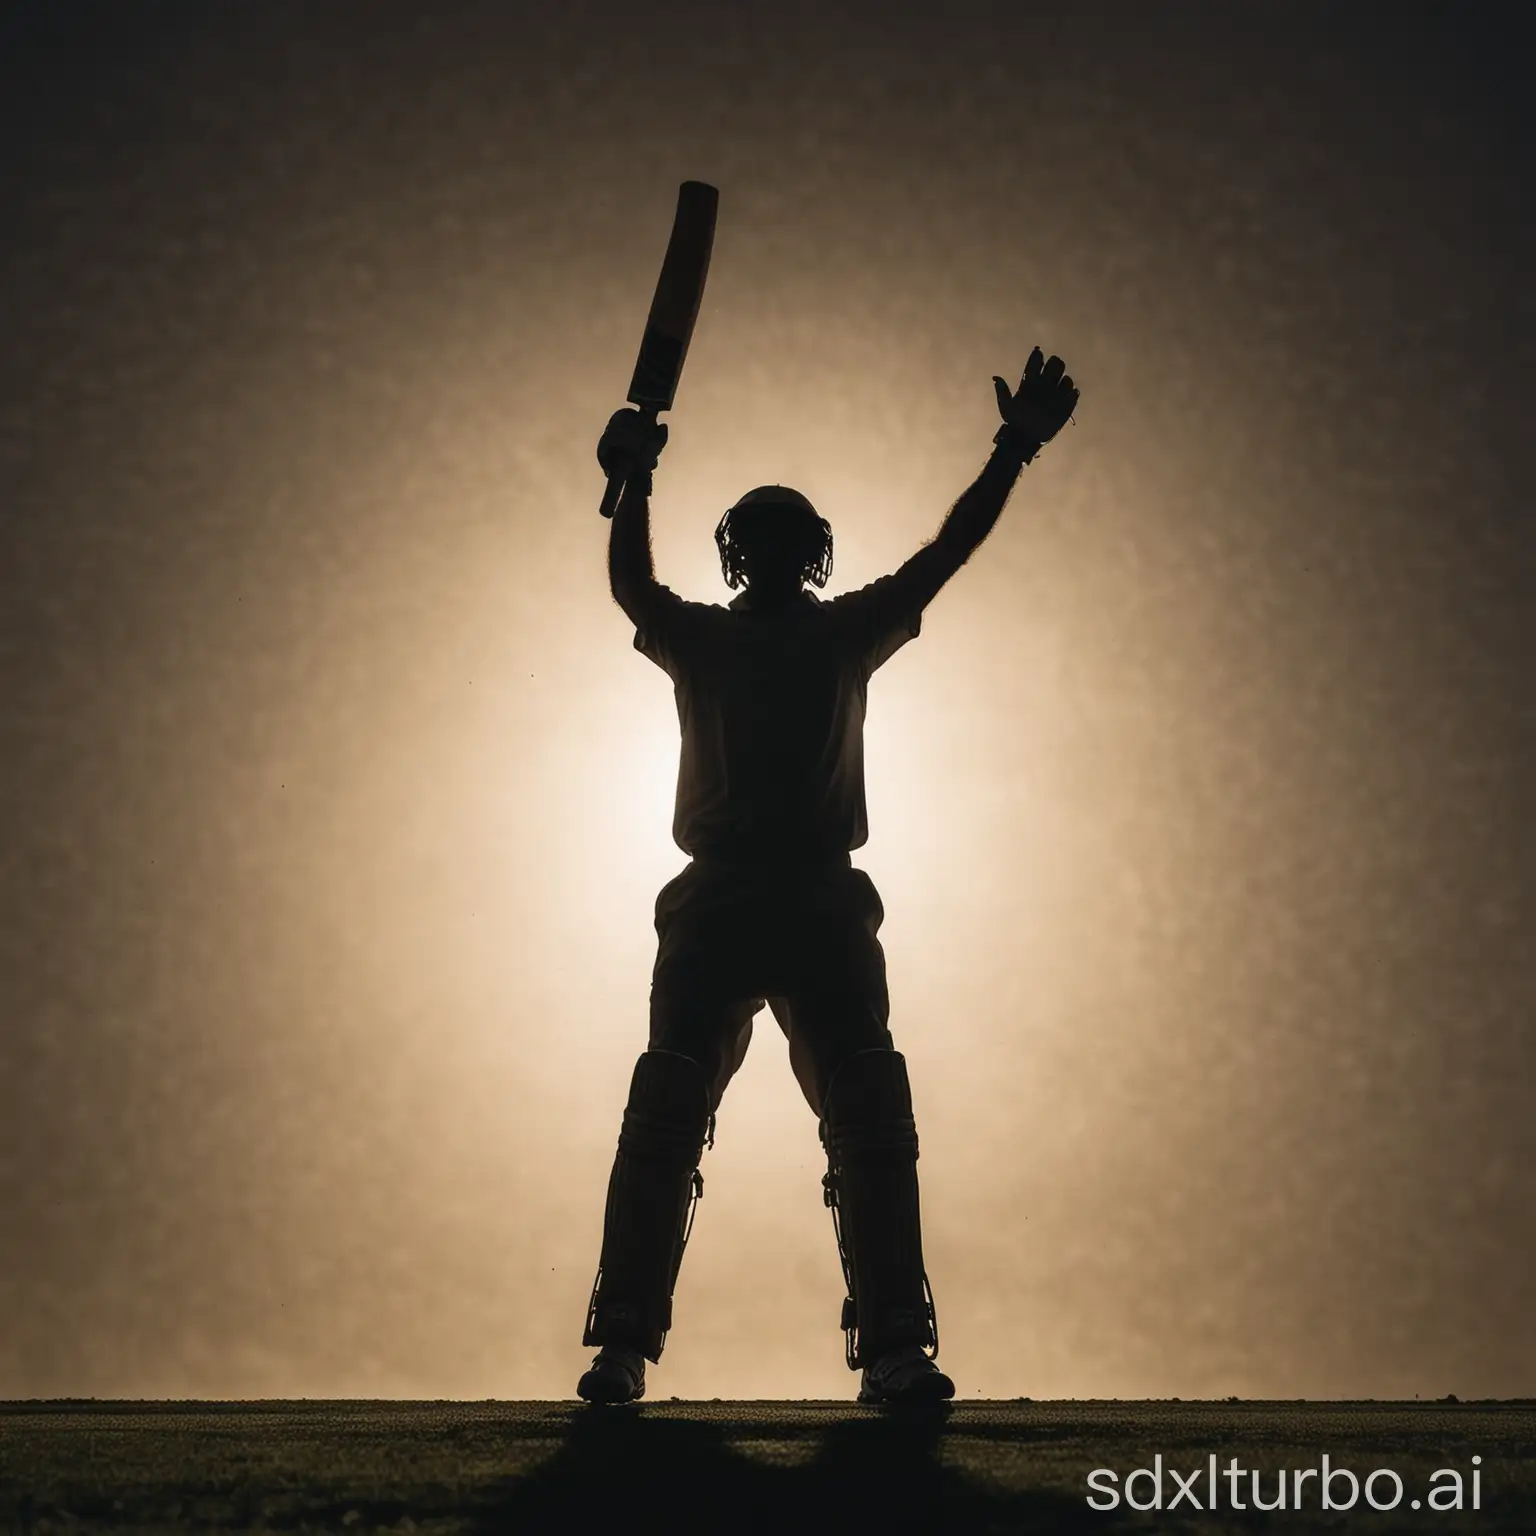 A silhouette of a cricket player celebrating after hitting a shot, with the bat raised triumphantly.